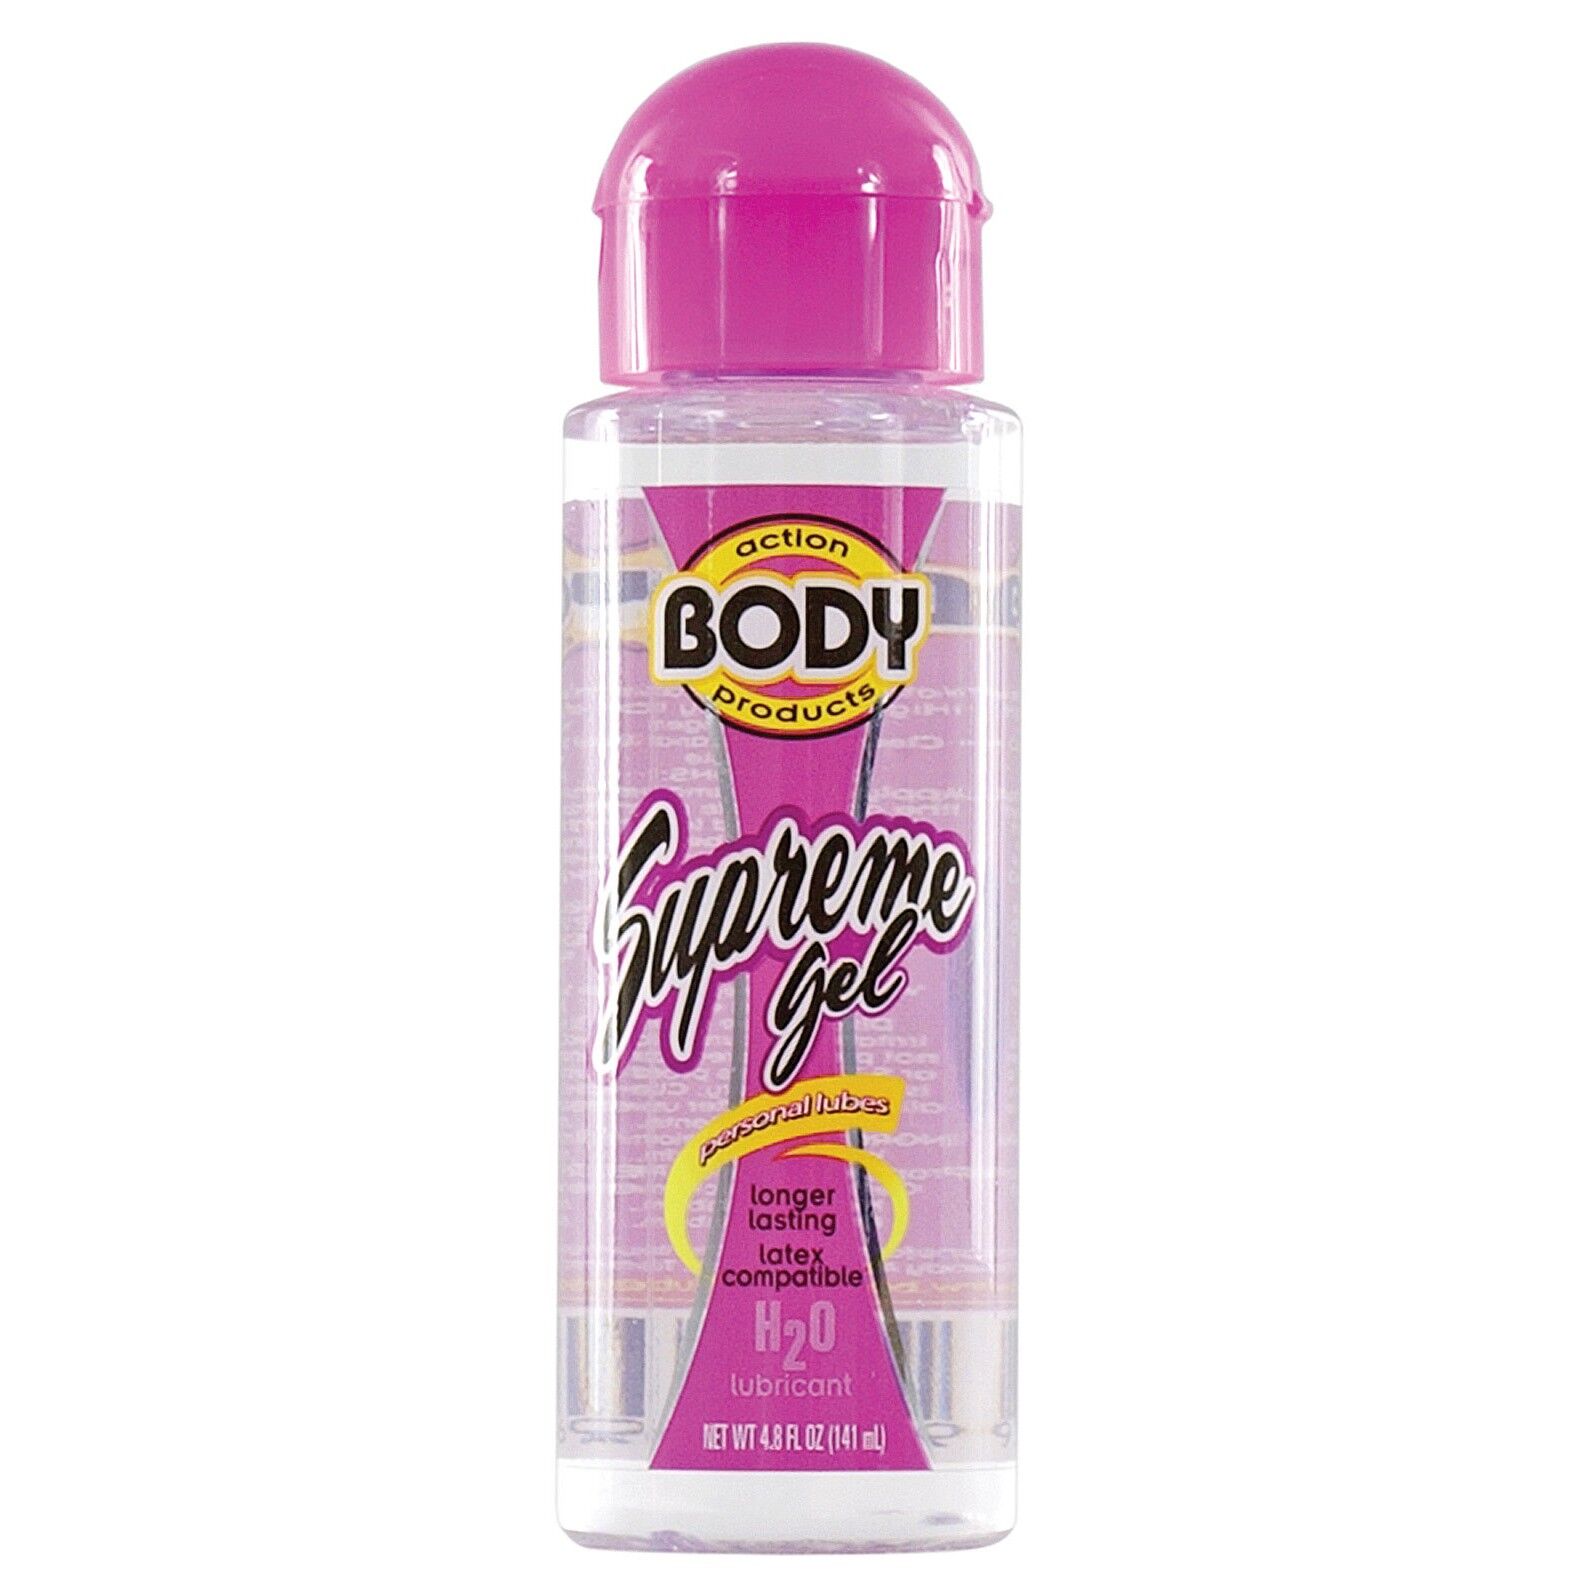 Adam and Eve Body Action Supreme Water Based Gel - 4.8 oz Bottle